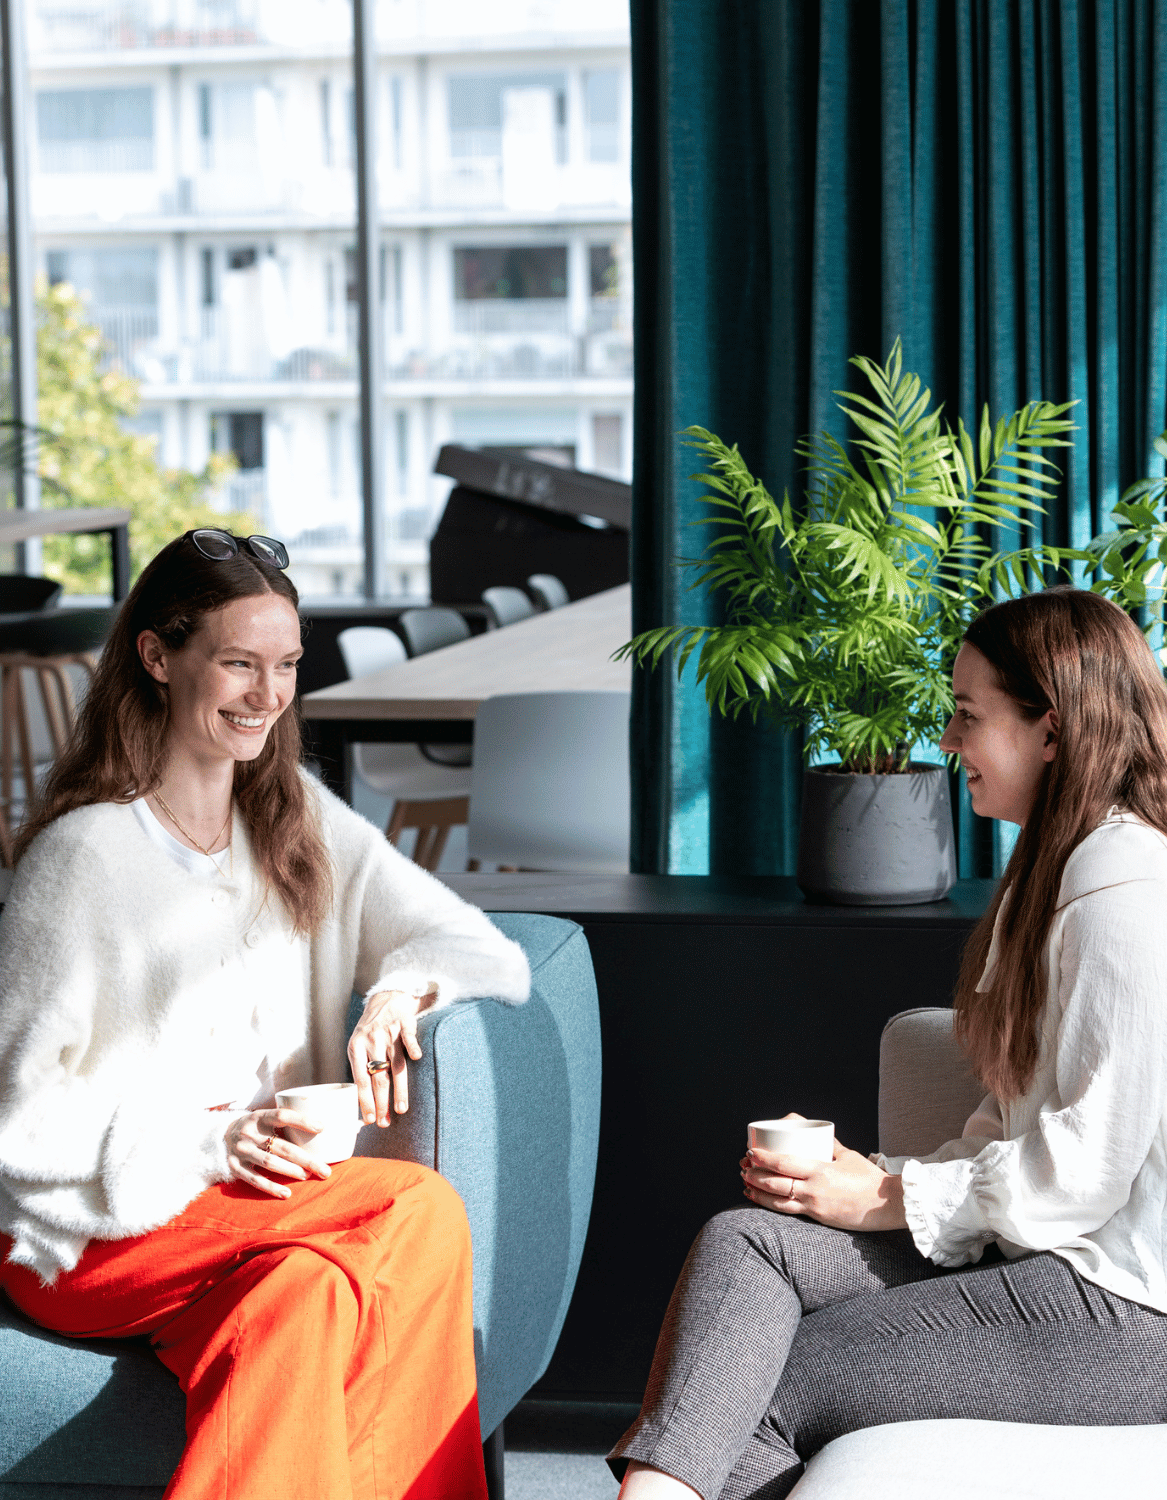 How did Marie & Isabelle experience their onboarding weeks?